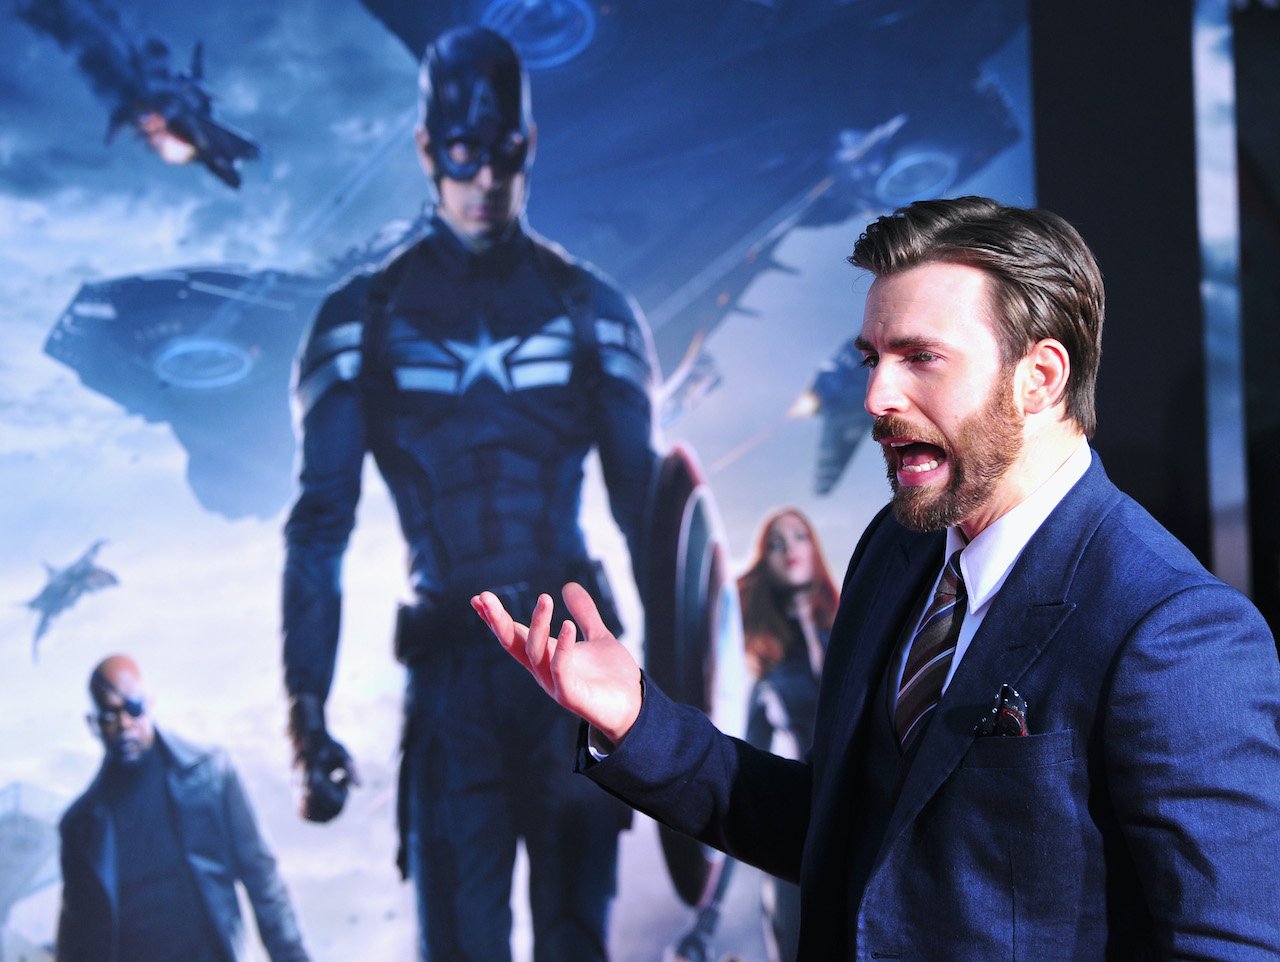 Chris Evans arrives at the premiere Of Marvel's "Captain America:The Winter Soldier